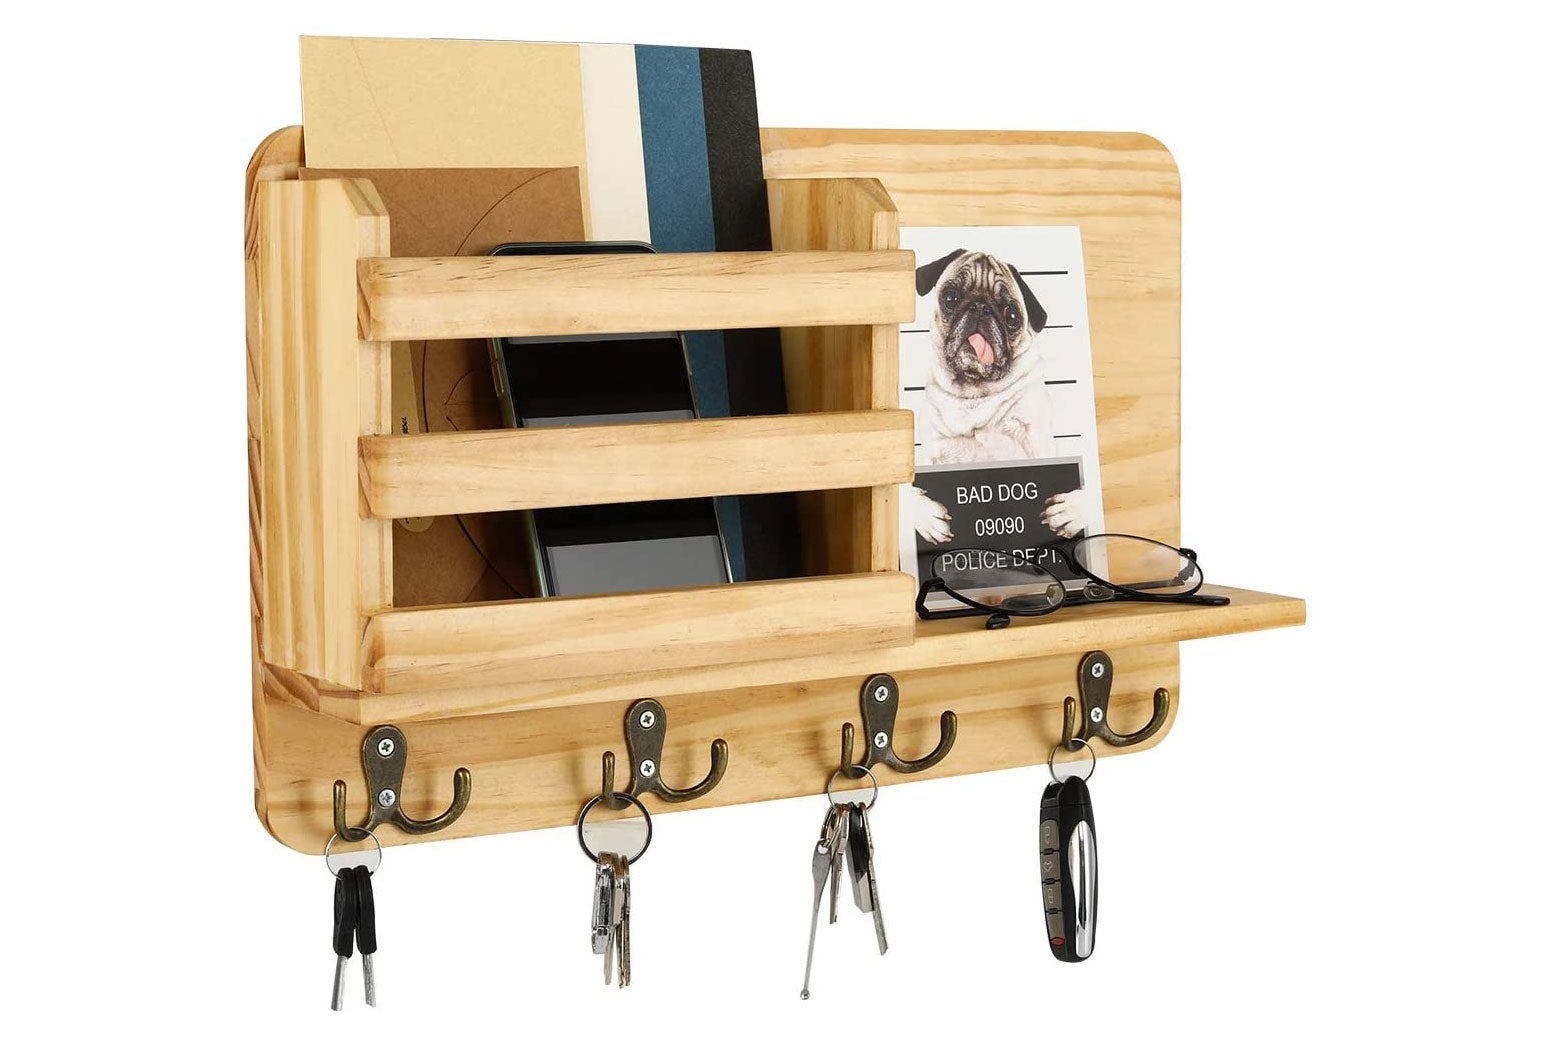 Wooden wall-mounted mail organizer with hooks for keys